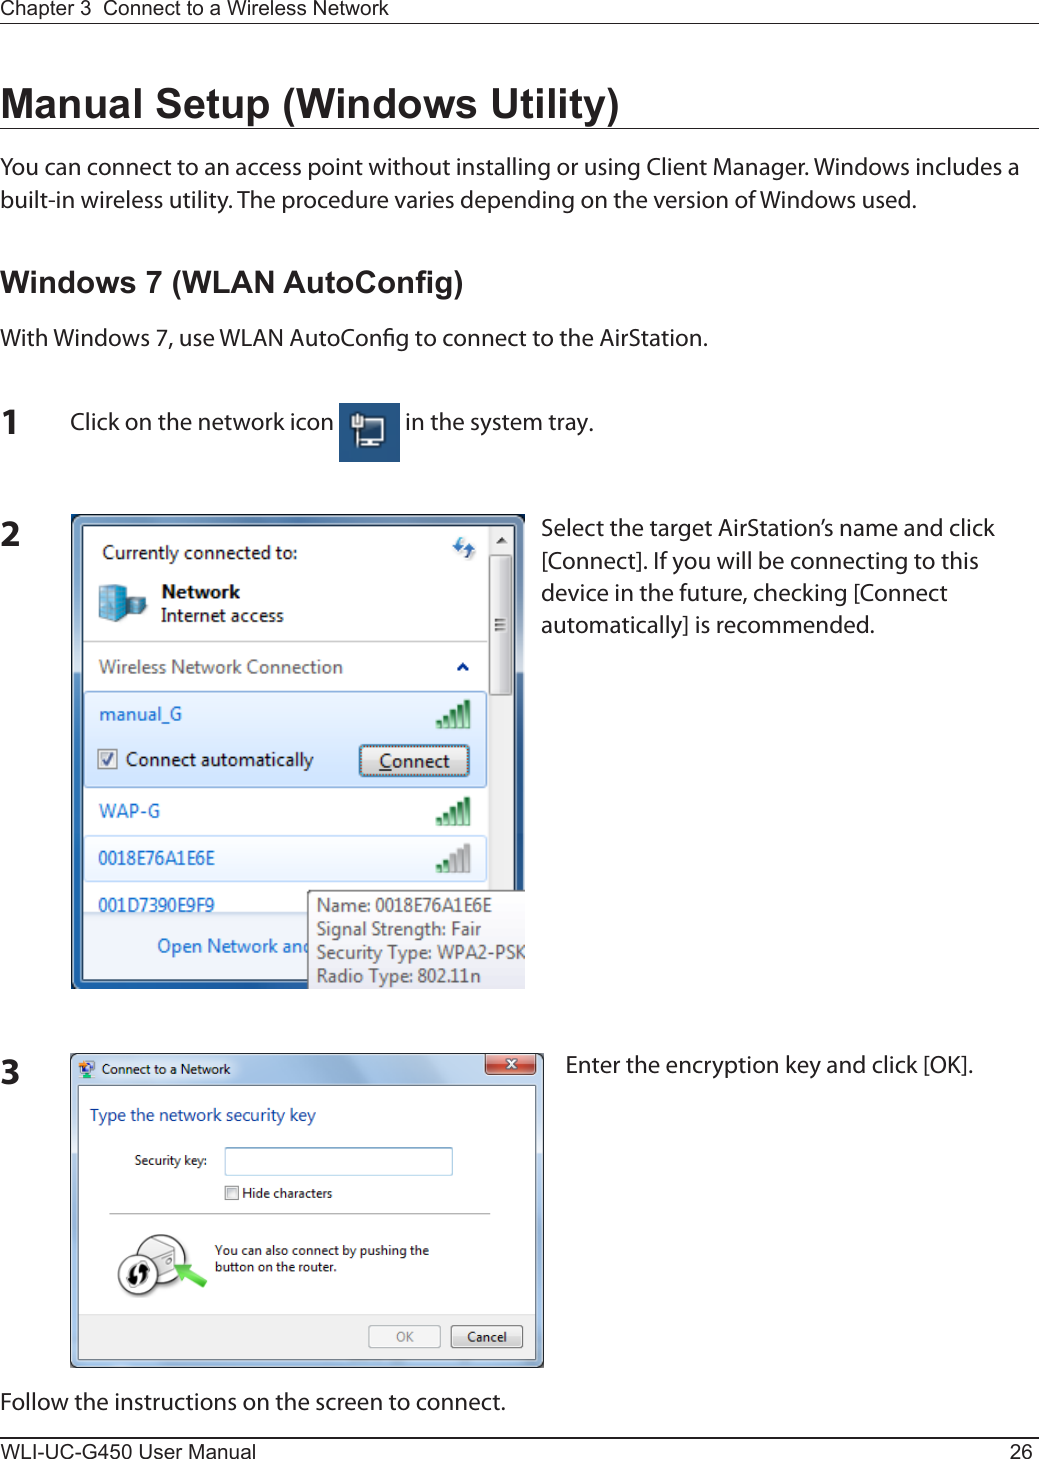 WLI-UC-G450 User Manual 26Chapter 3  Connect to a Wireless Network Manual Setup (Windows Utility)You can connect to an access point without installing or using Client Manager. Windows includes a built-in wireless utility. The procedure varies depending on the version of Windows used.Windows 7 (WLAN AutoCong)With Windows 7, use WLAN AutoCong to connect to the AirStation.1Click on the network icon   in the system tray.2Select the target AirStation’s name and click [Connect]. If you will be connecting to this device in the future, checking [Connect automatically] is recommended.3Enter the encryption key and click [OK]. Follow the instructions on the screen to connect.